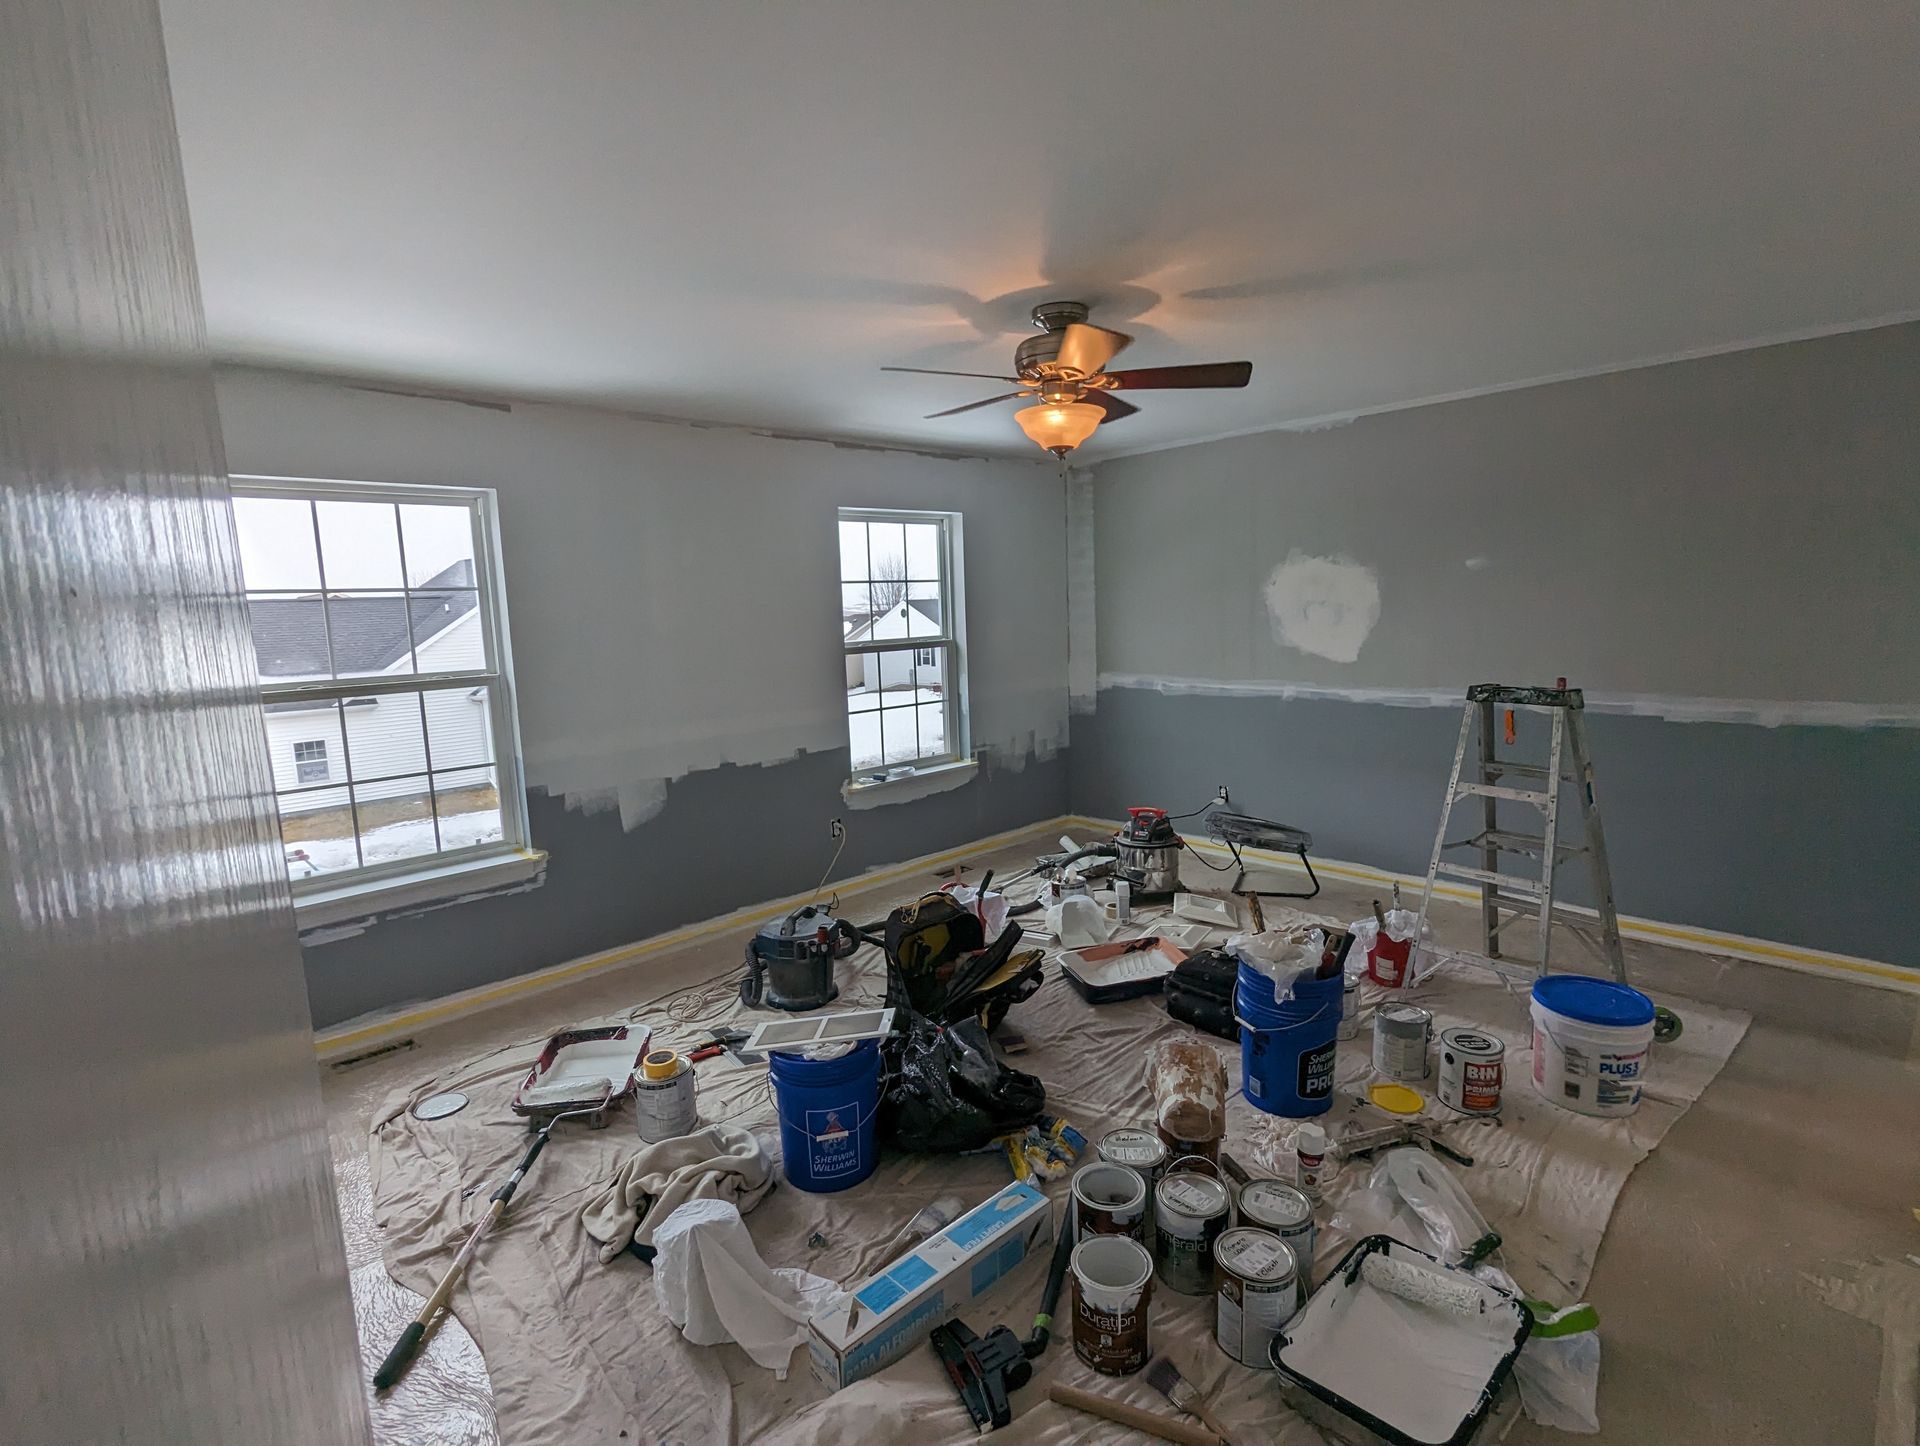 Bedroom Before — Bayside, WI — The Village Painter LLC